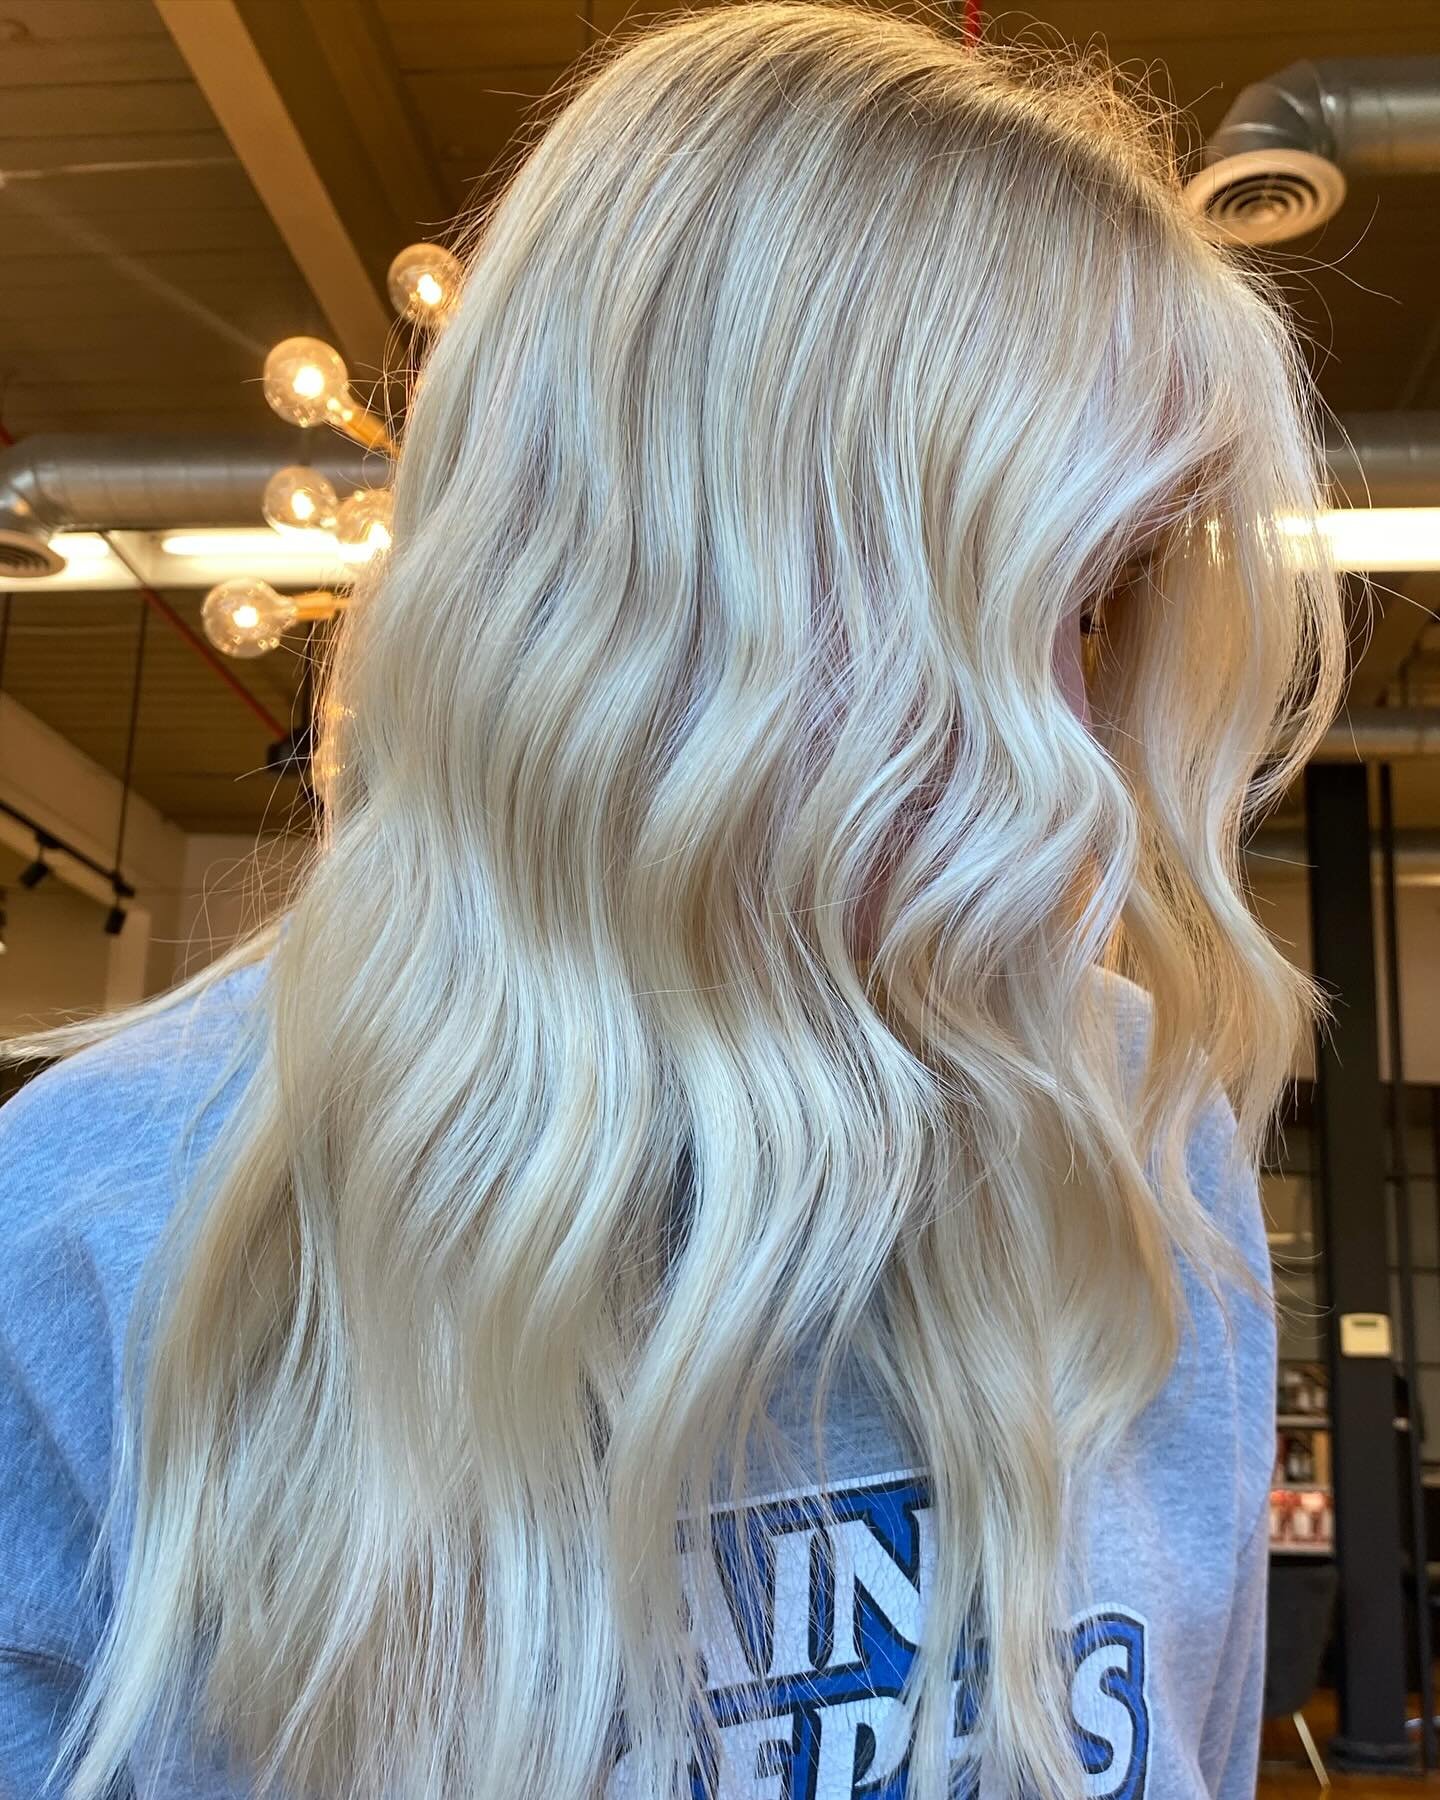 Looking for blonde this summer? Better book soon!
Gorgeous blonde by @jonhannahair